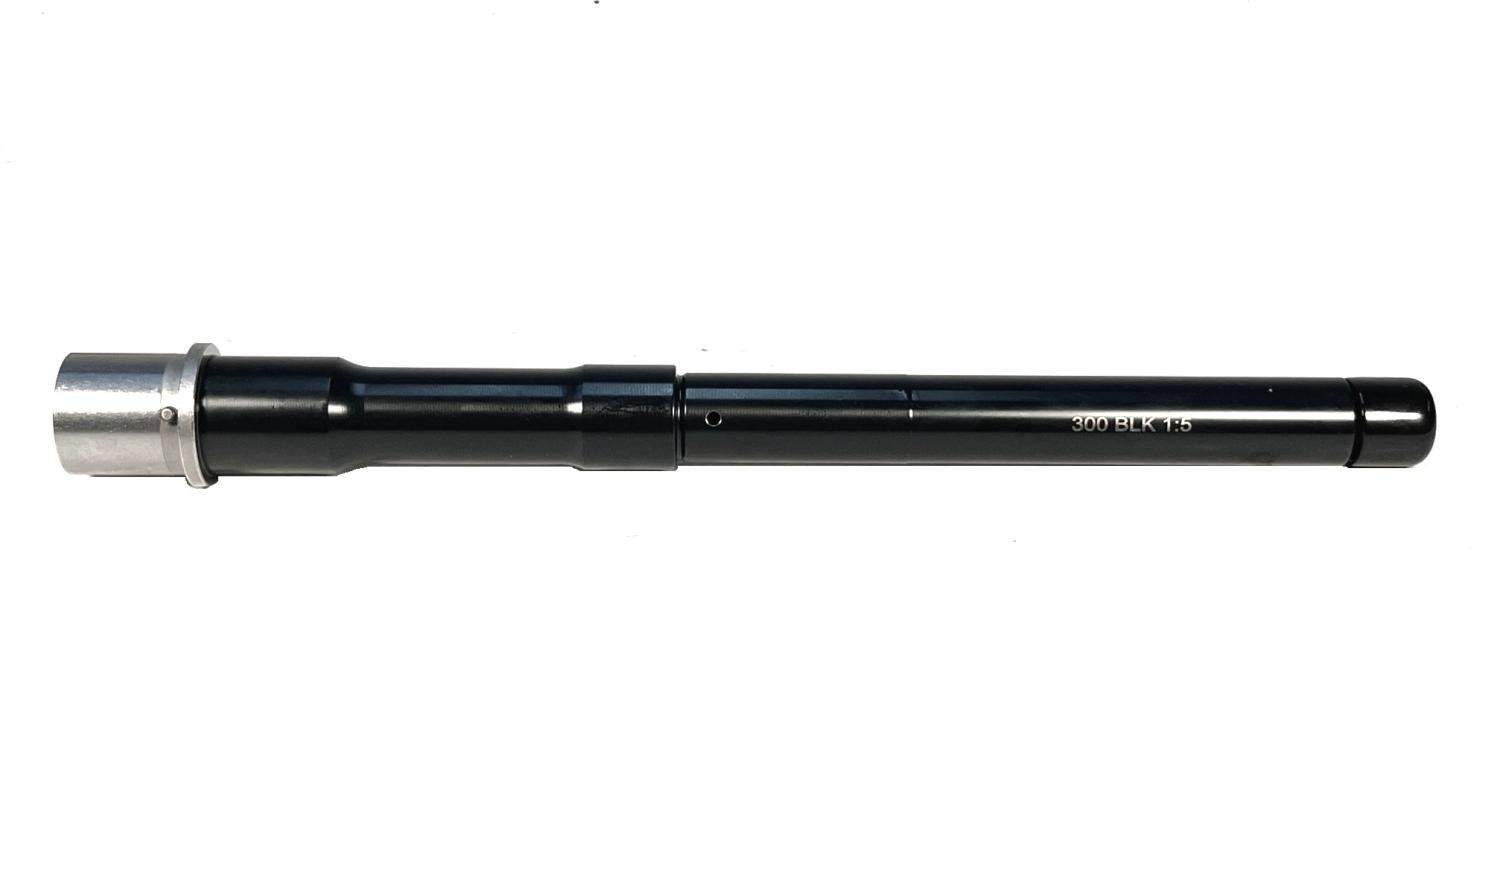 Tactical Kinetics 10.5 inch 300 Blackout Barrel 1 in 5 Twist - $154.99 after $15 off